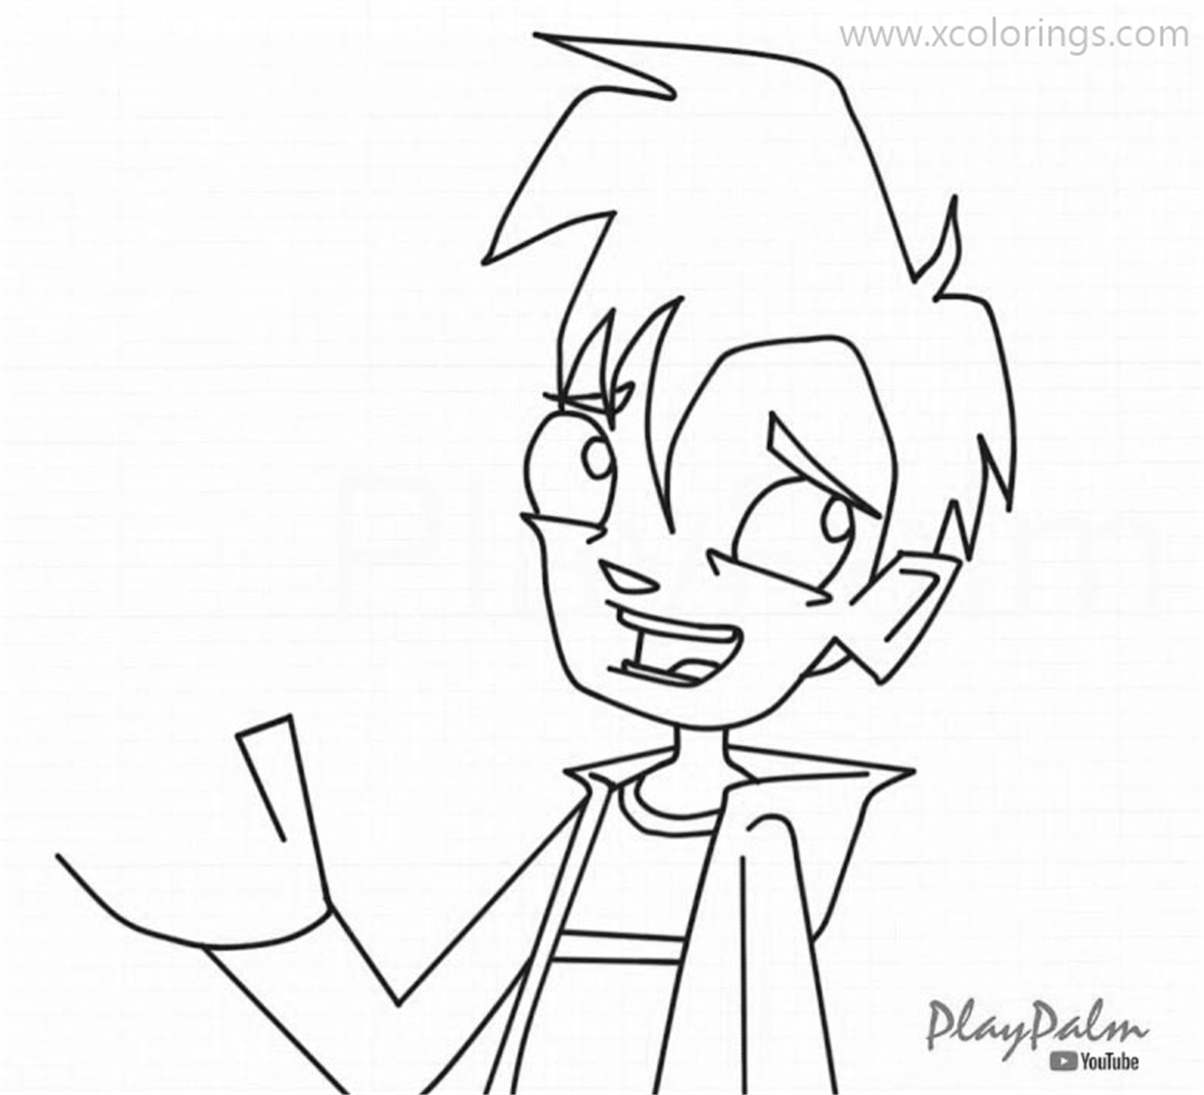 Free Randy Cunningham Coloring Pages Randy Fan Fiction printable